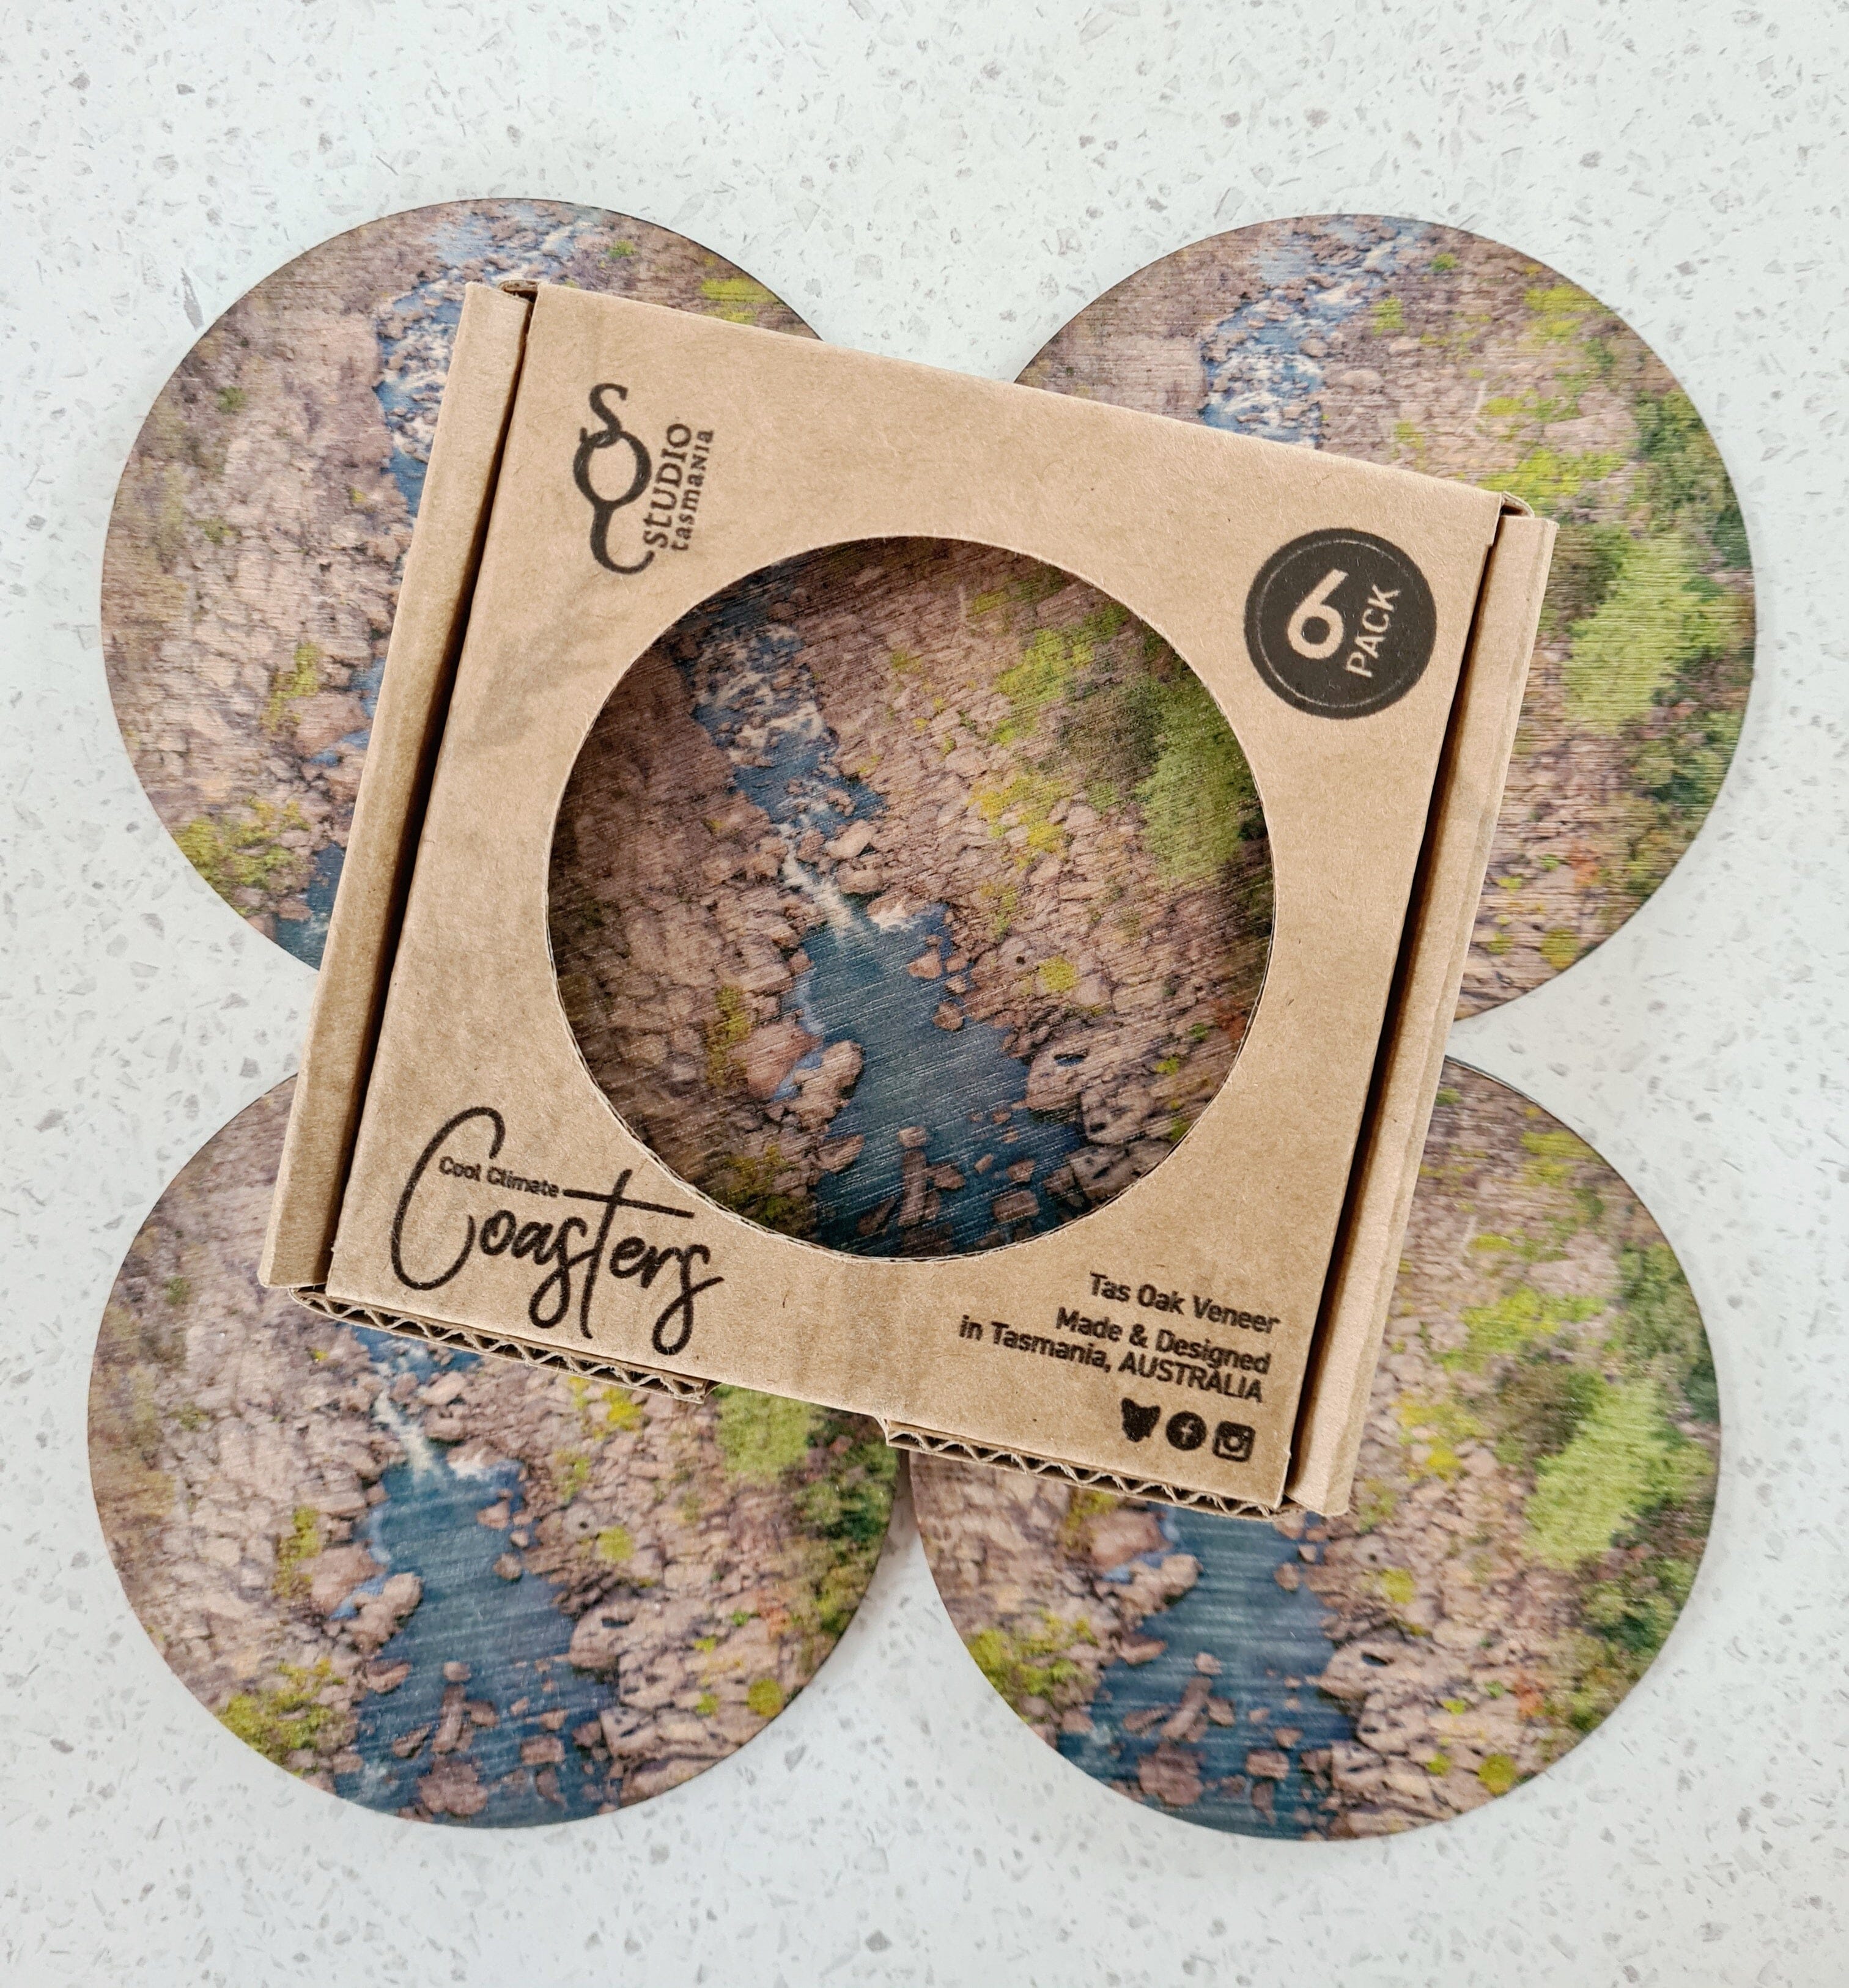 Coasters Cool Climate - The Spotted Quoll Studio tablewear The Spotted Quoll Cataract Gorge Launceston 